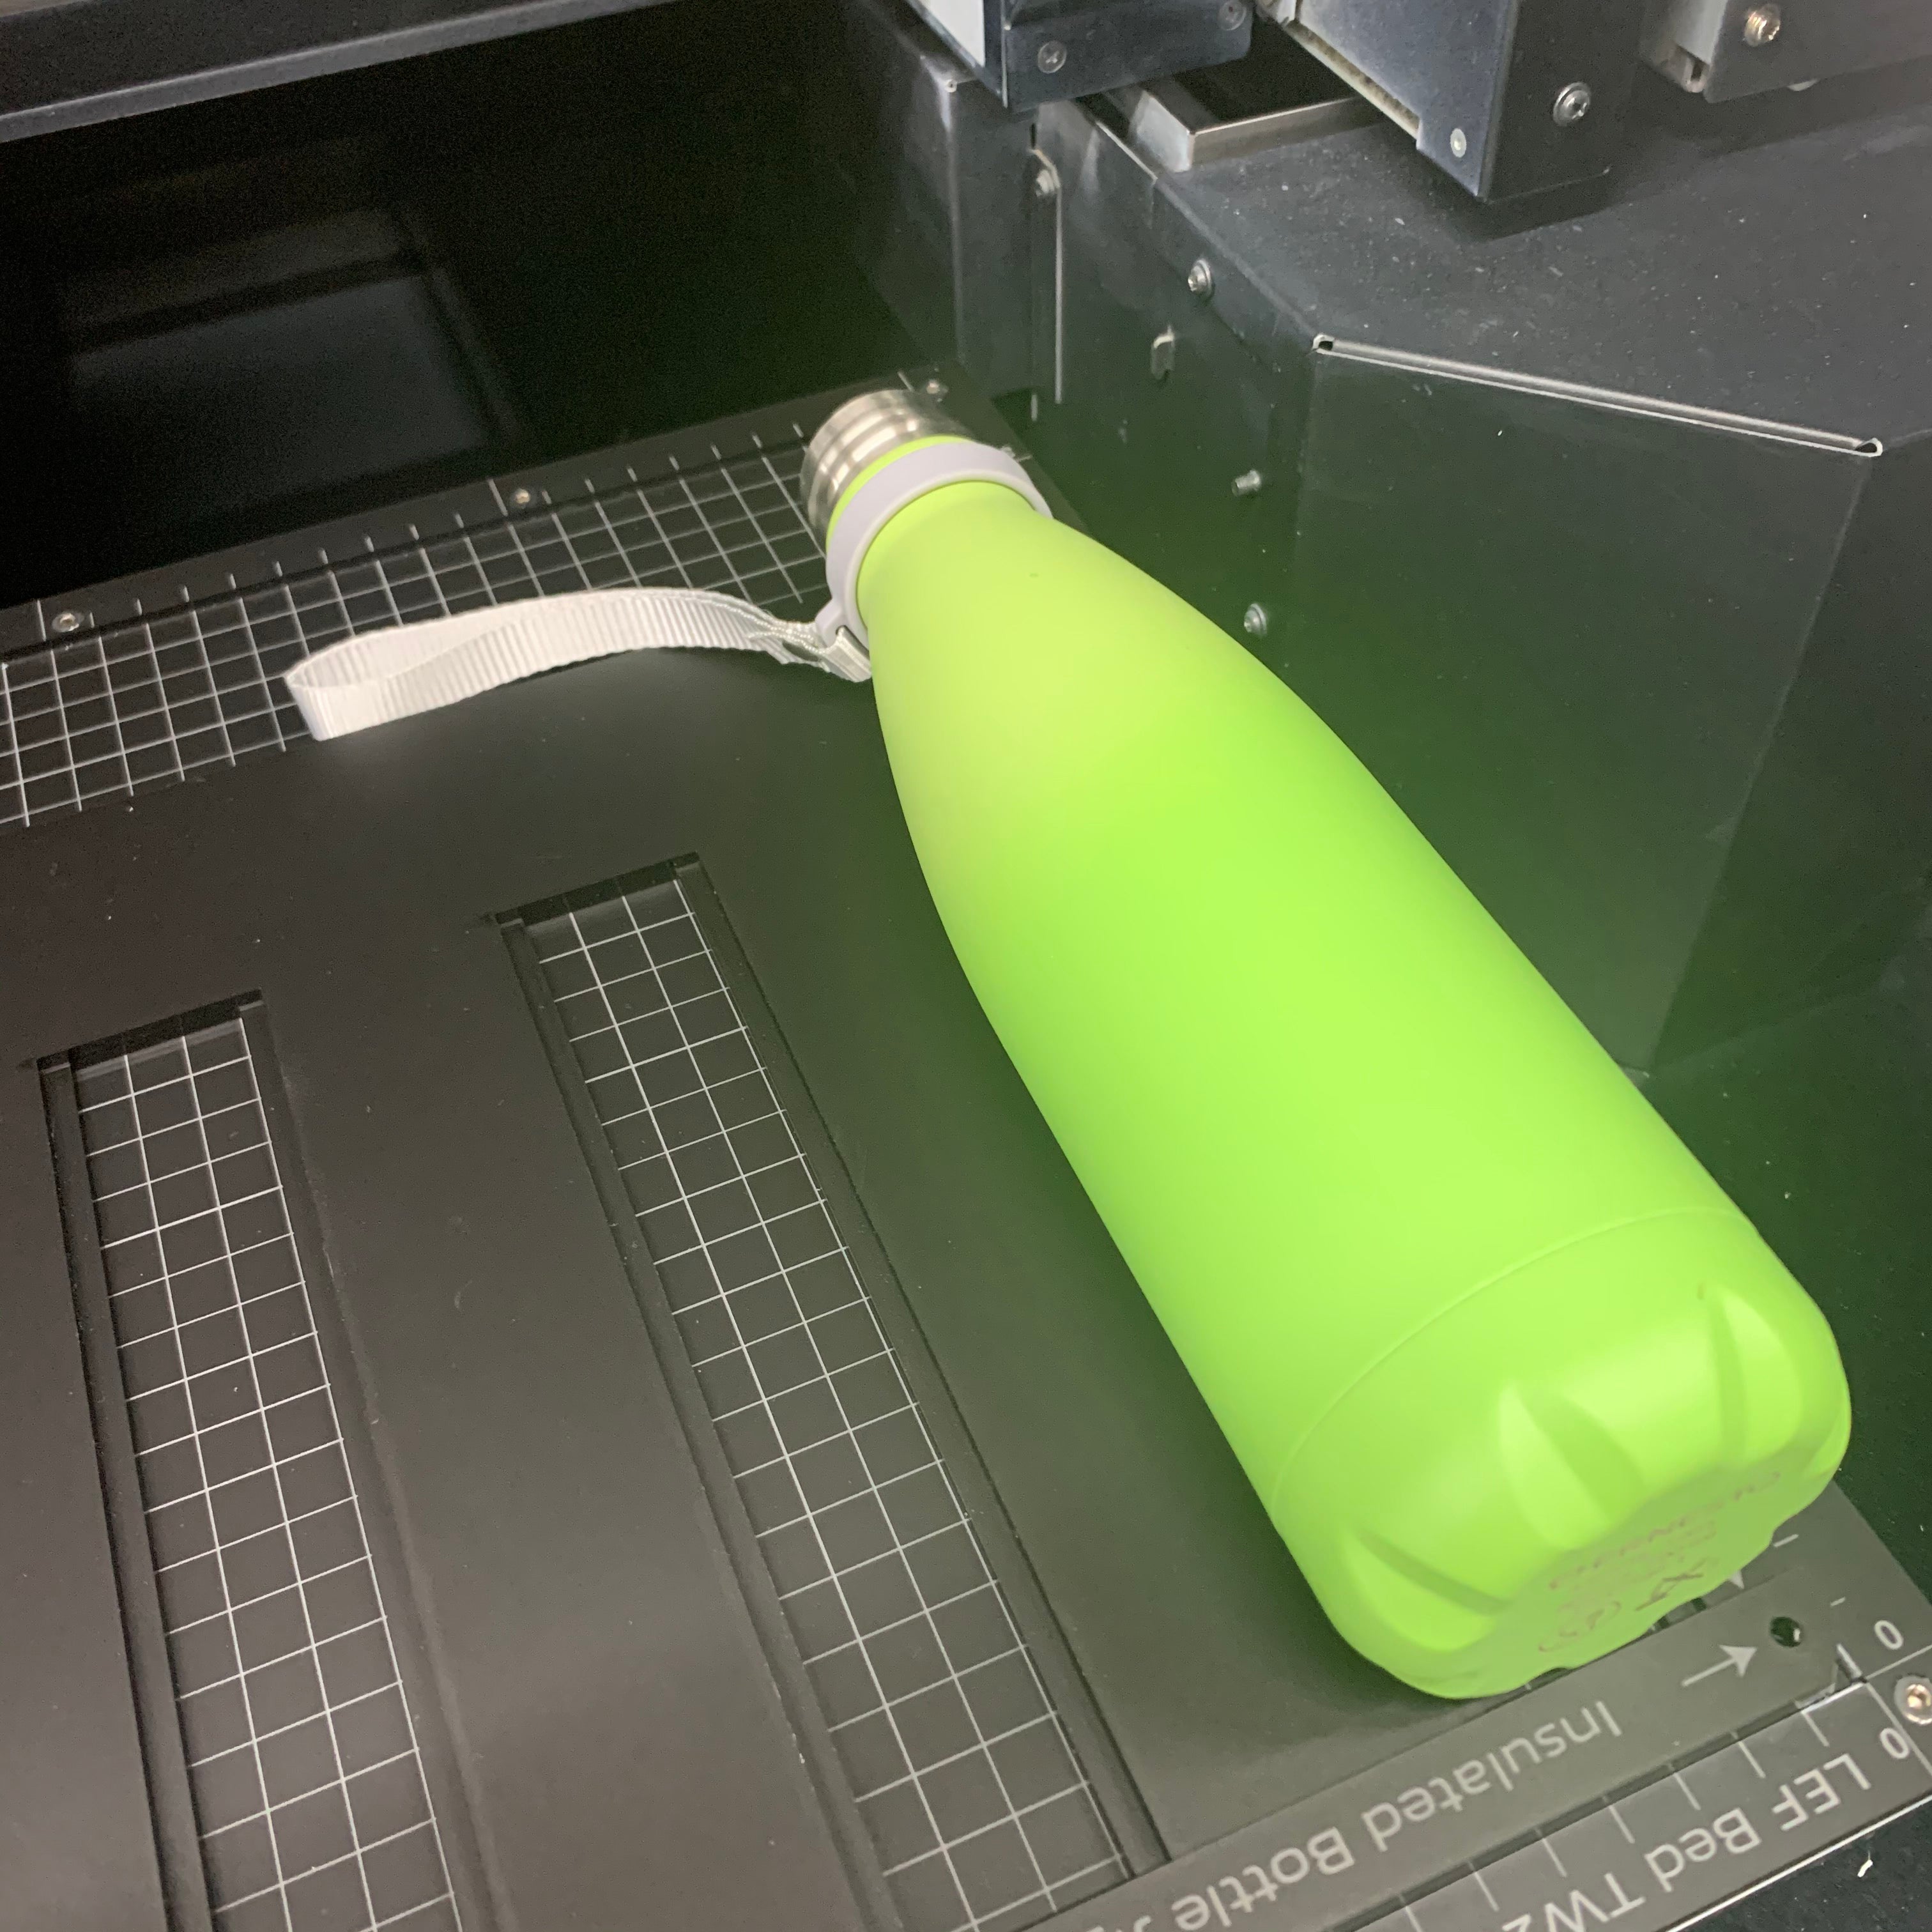 Insulated Bottle Jig for Mimaki UJF-7151 Flatbed Printer (12 Spaces)